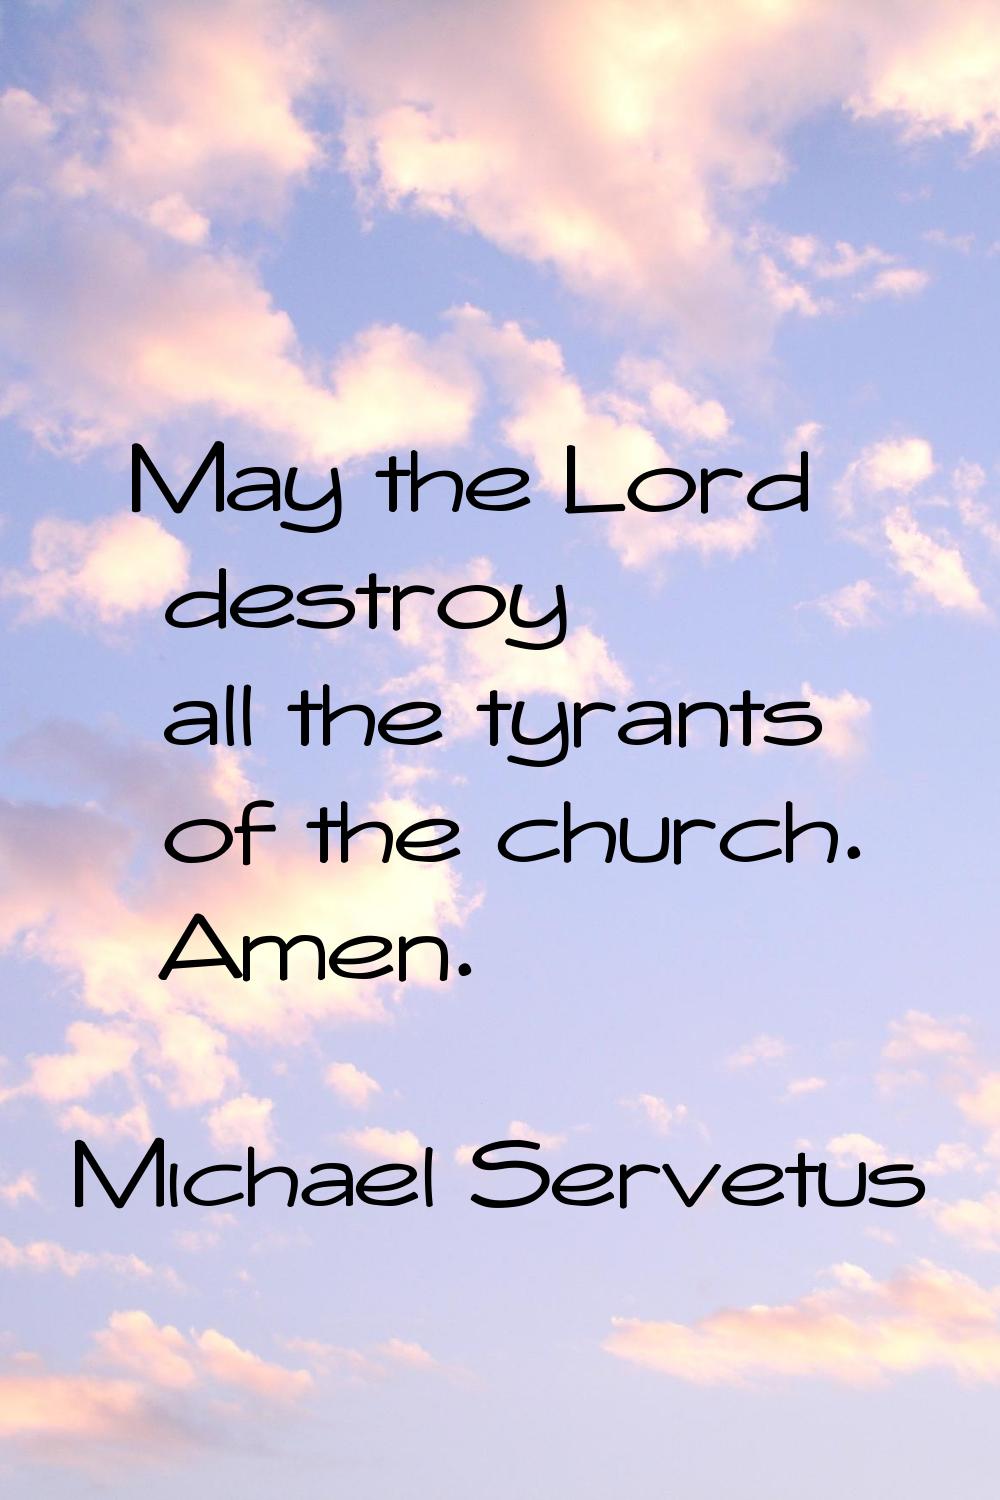 May the Lord destroy all the tyrants of the church. Amen.